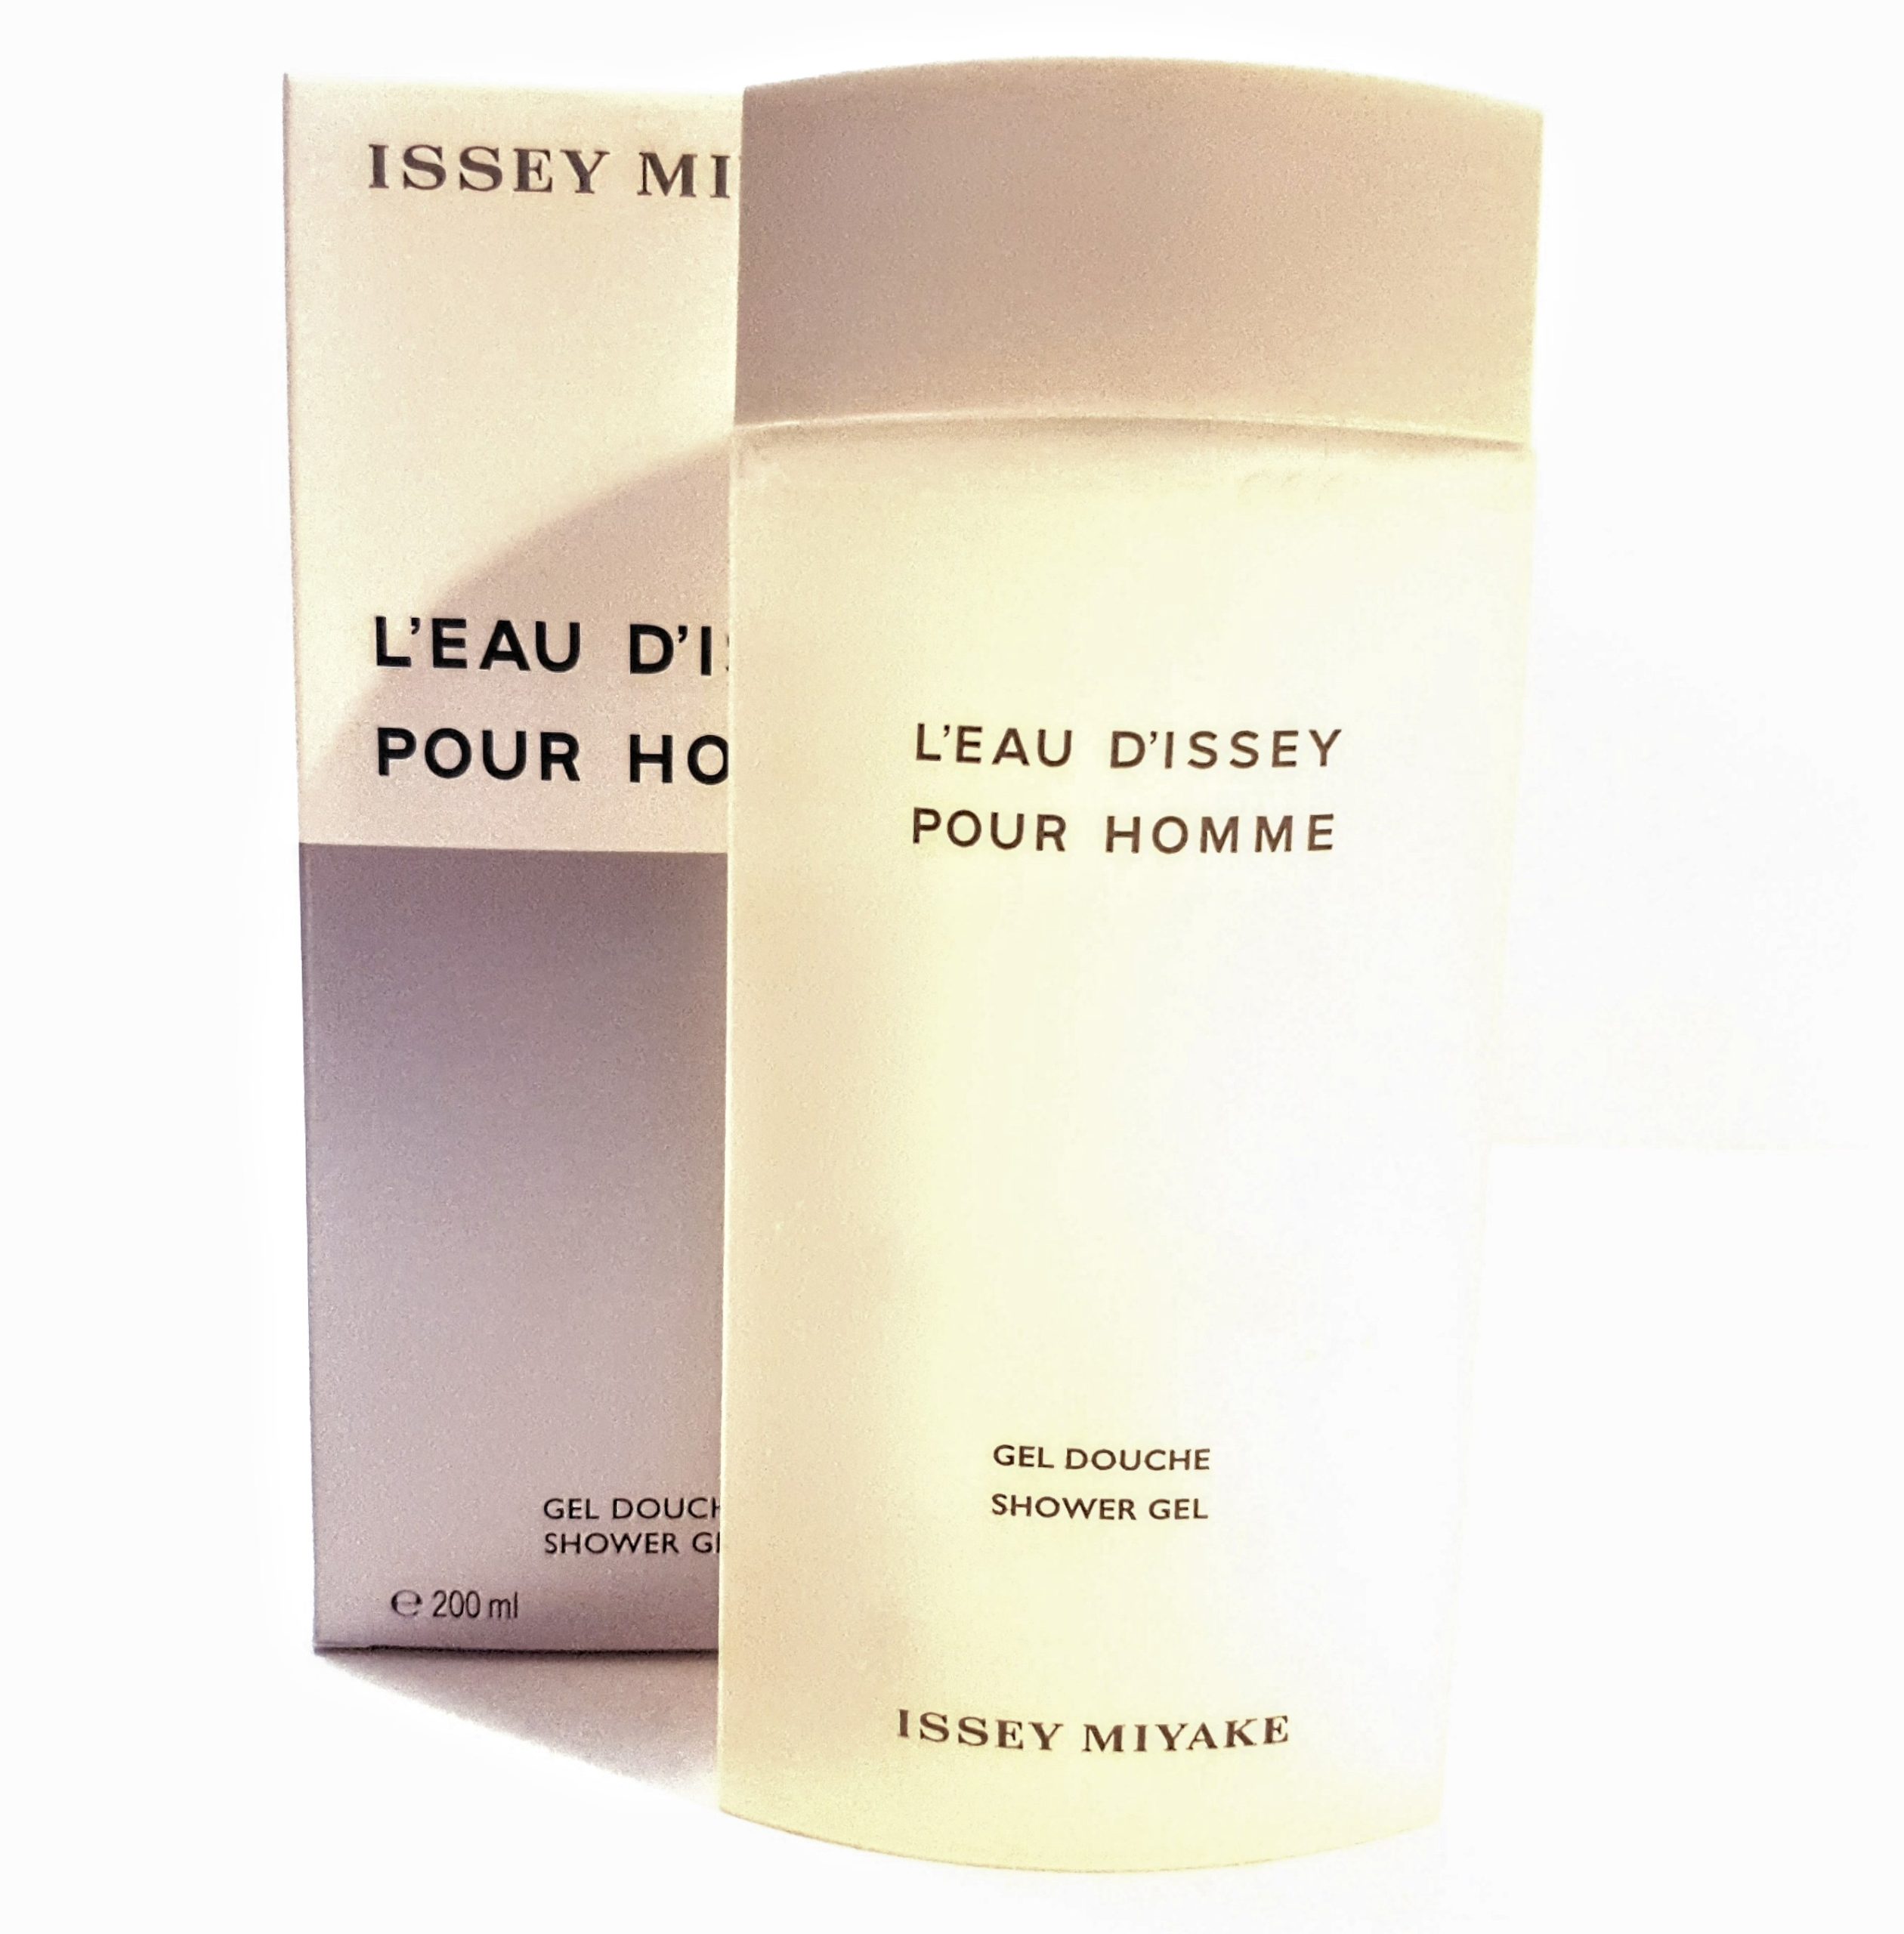 Issey Miyake L’eau D’issey, 200ml Pour Homme Shower Gel  dissy pour pour homme.